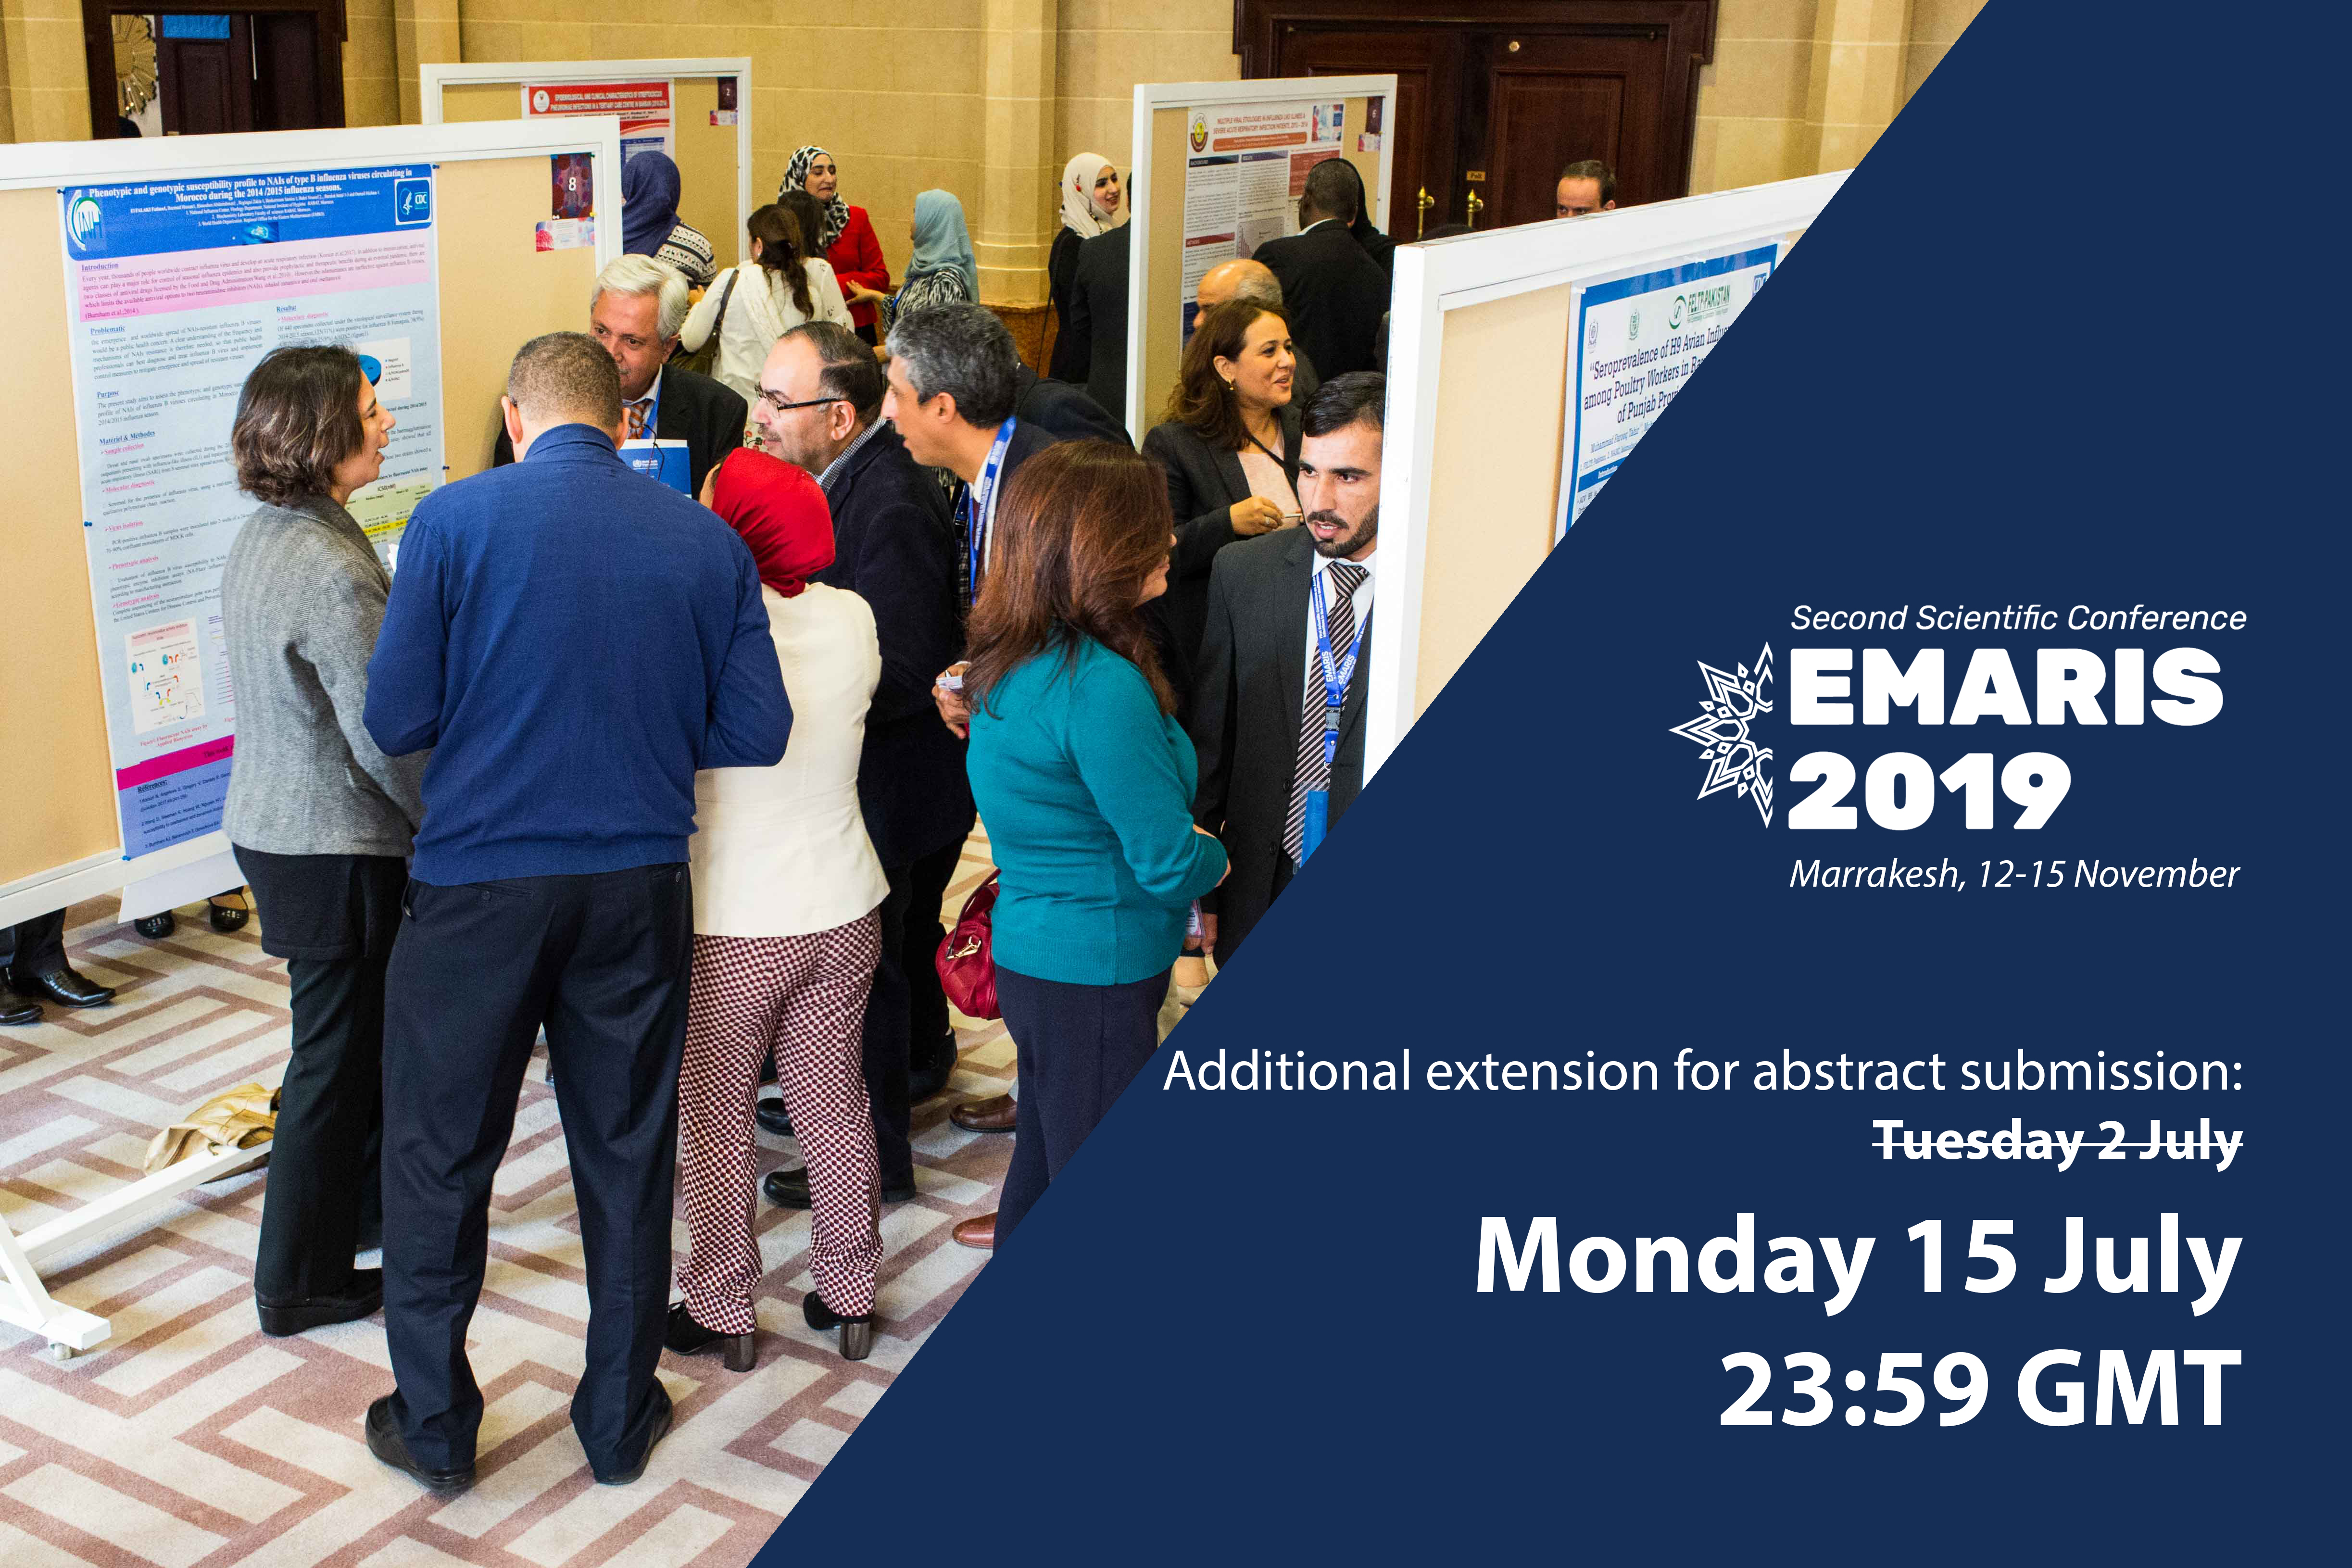 EMARIS 2019: Top 5 reasons to submit your abstract